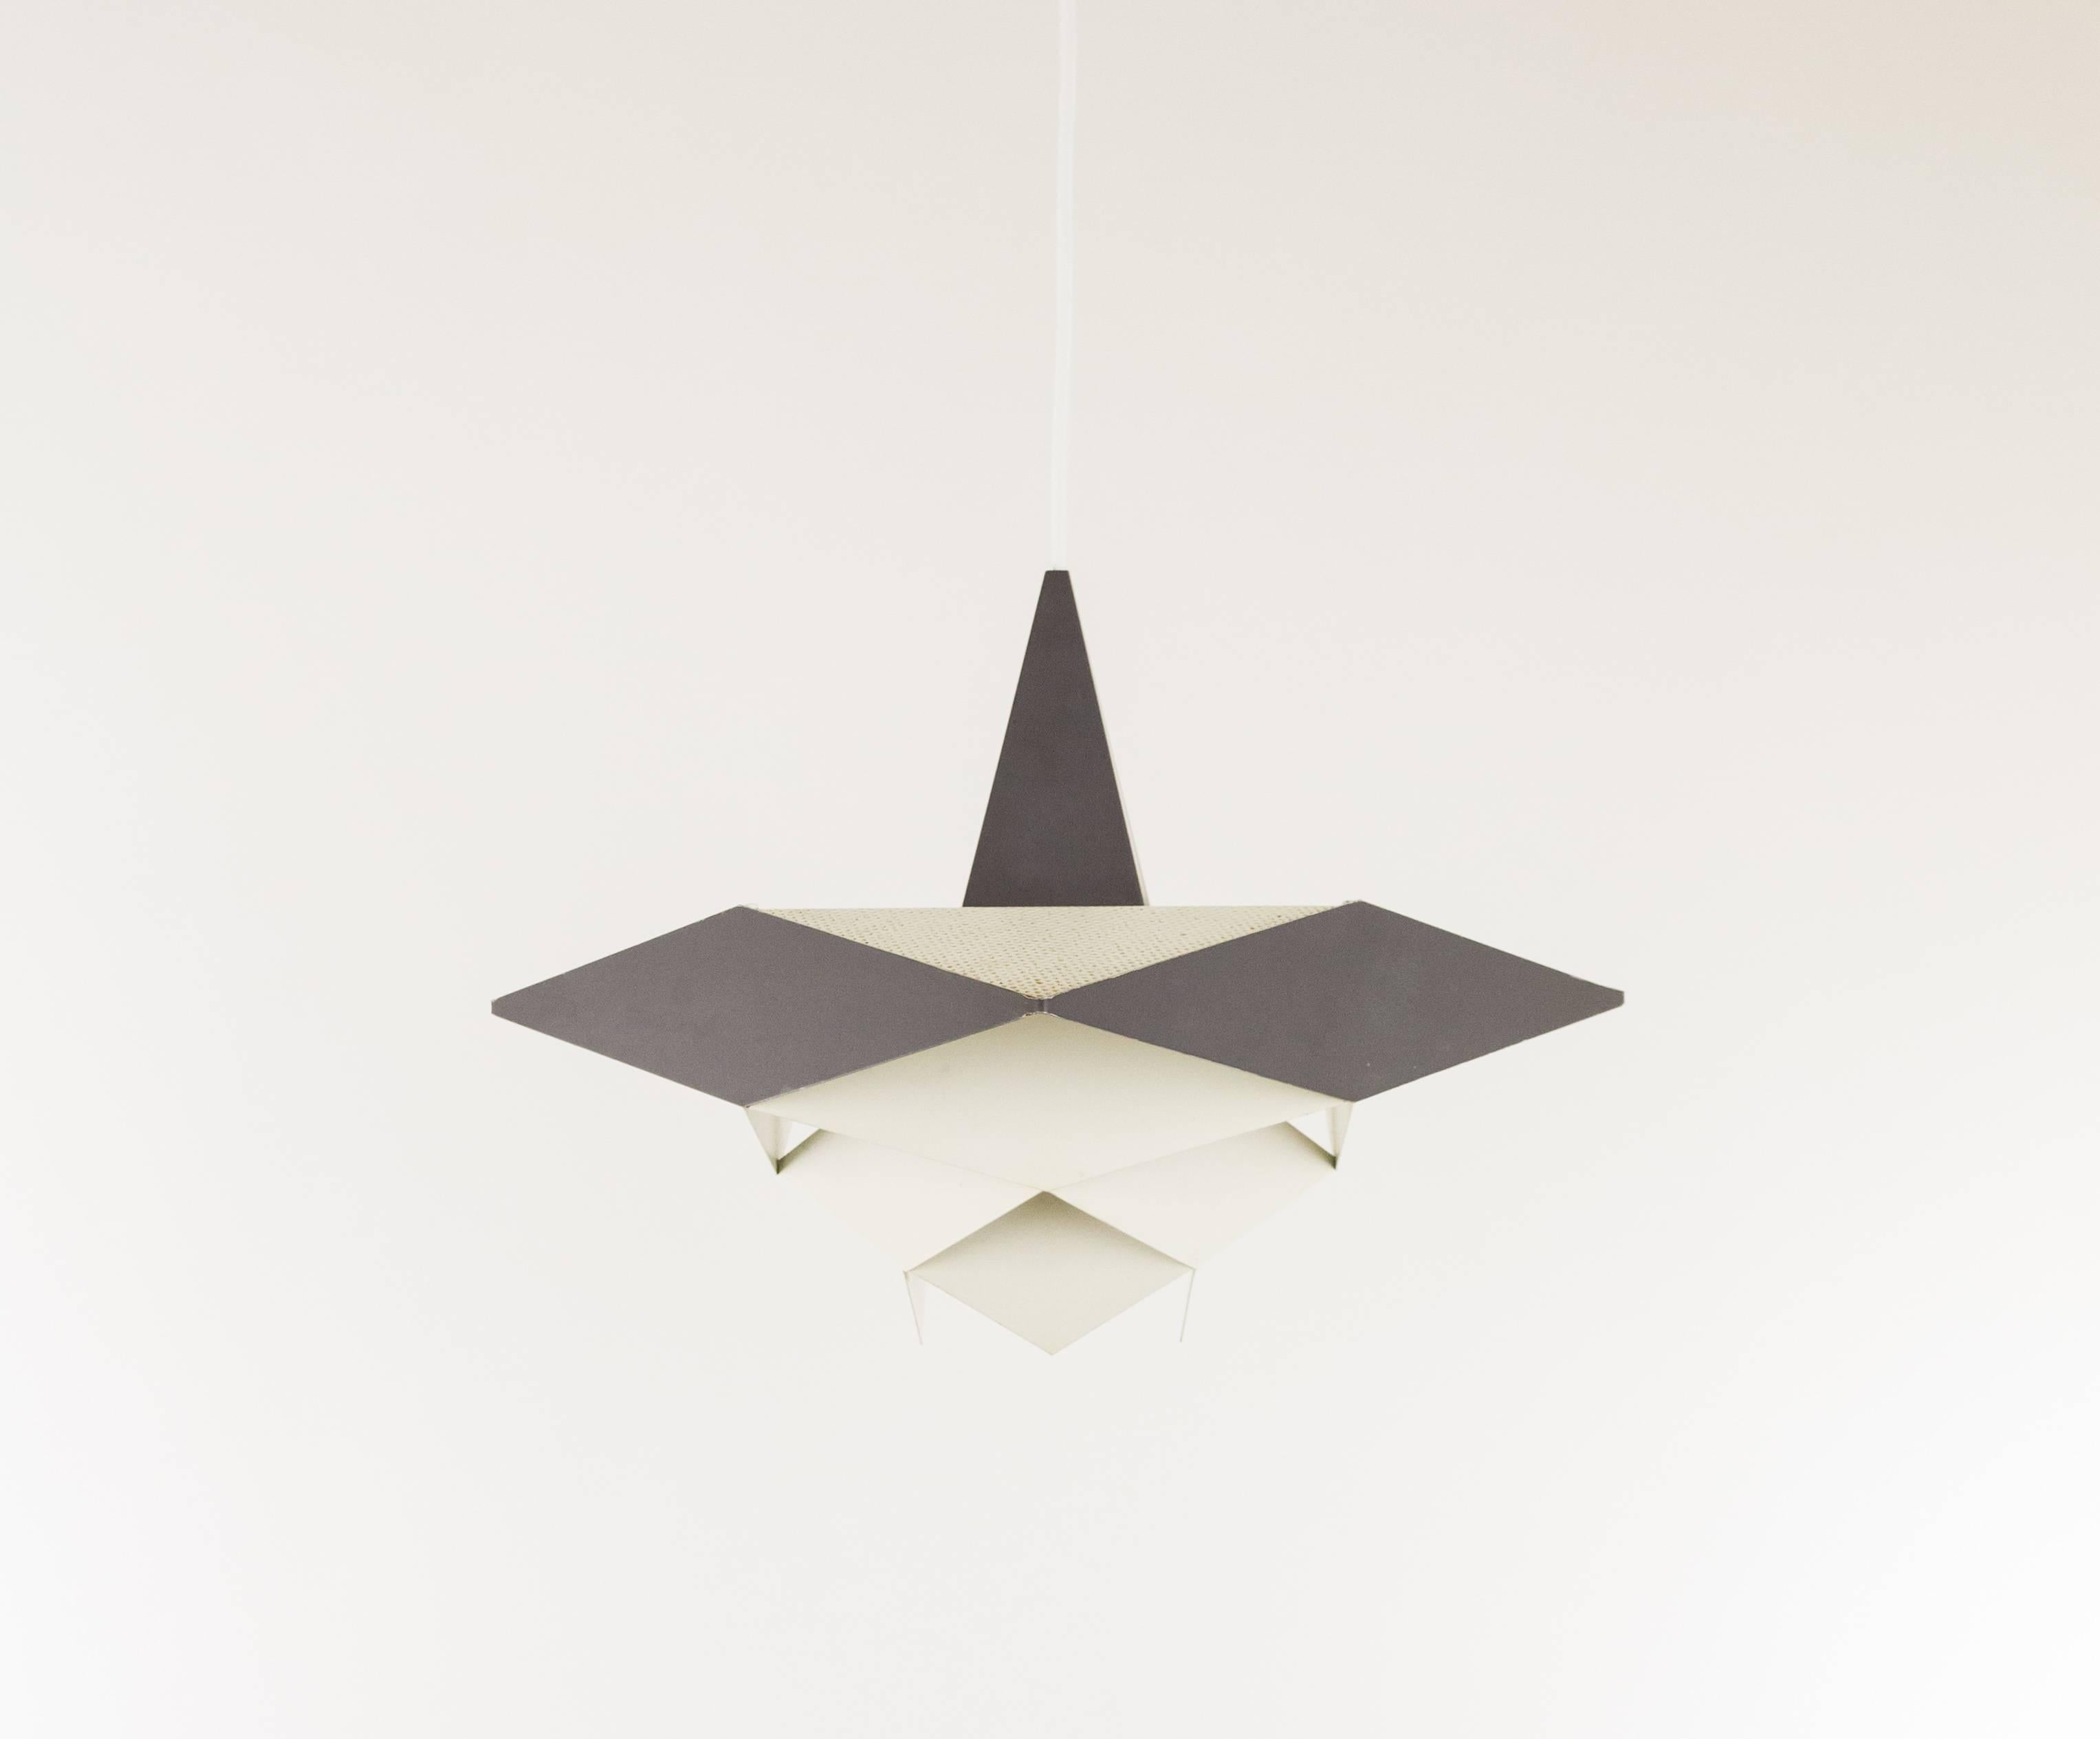 Lacquered Metal Pendant by Preben Dahl for Hans Følsgaard Belysning in white and grey